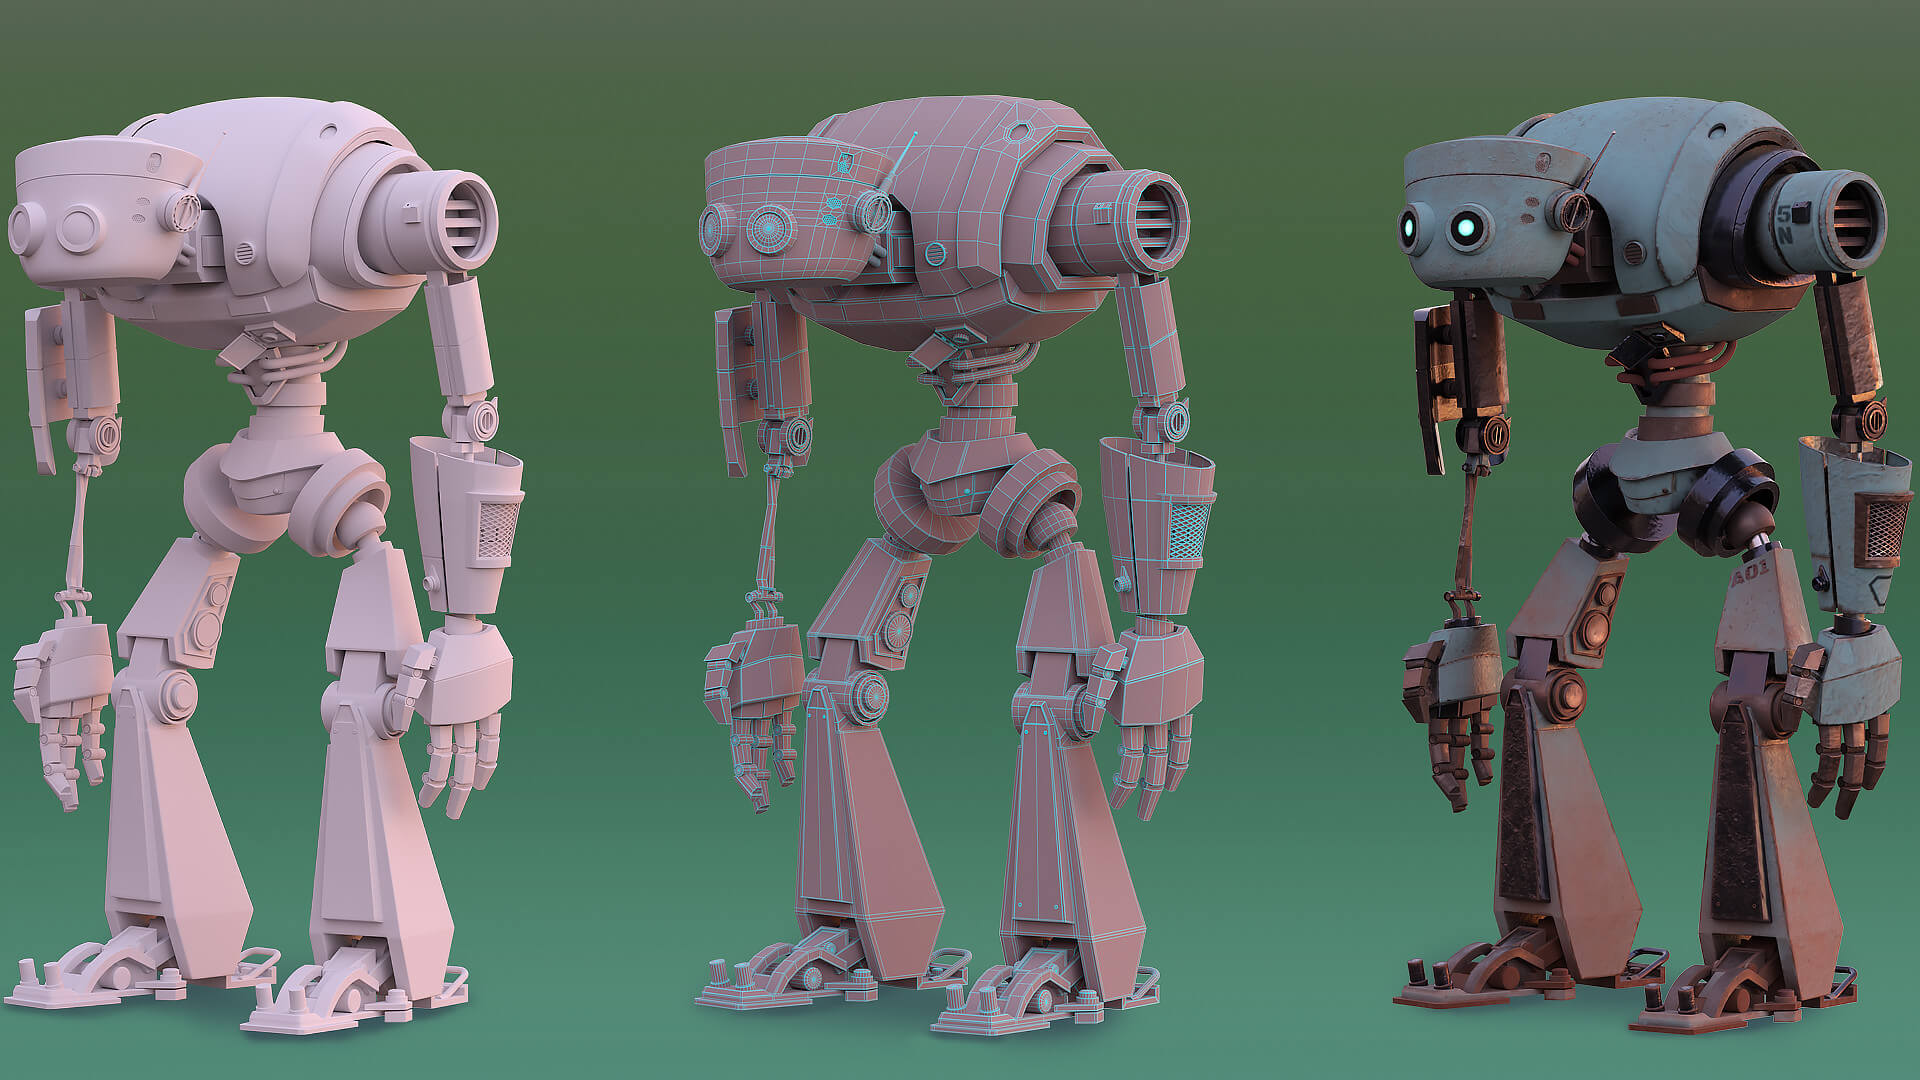 CG model of a robot in three stages of development